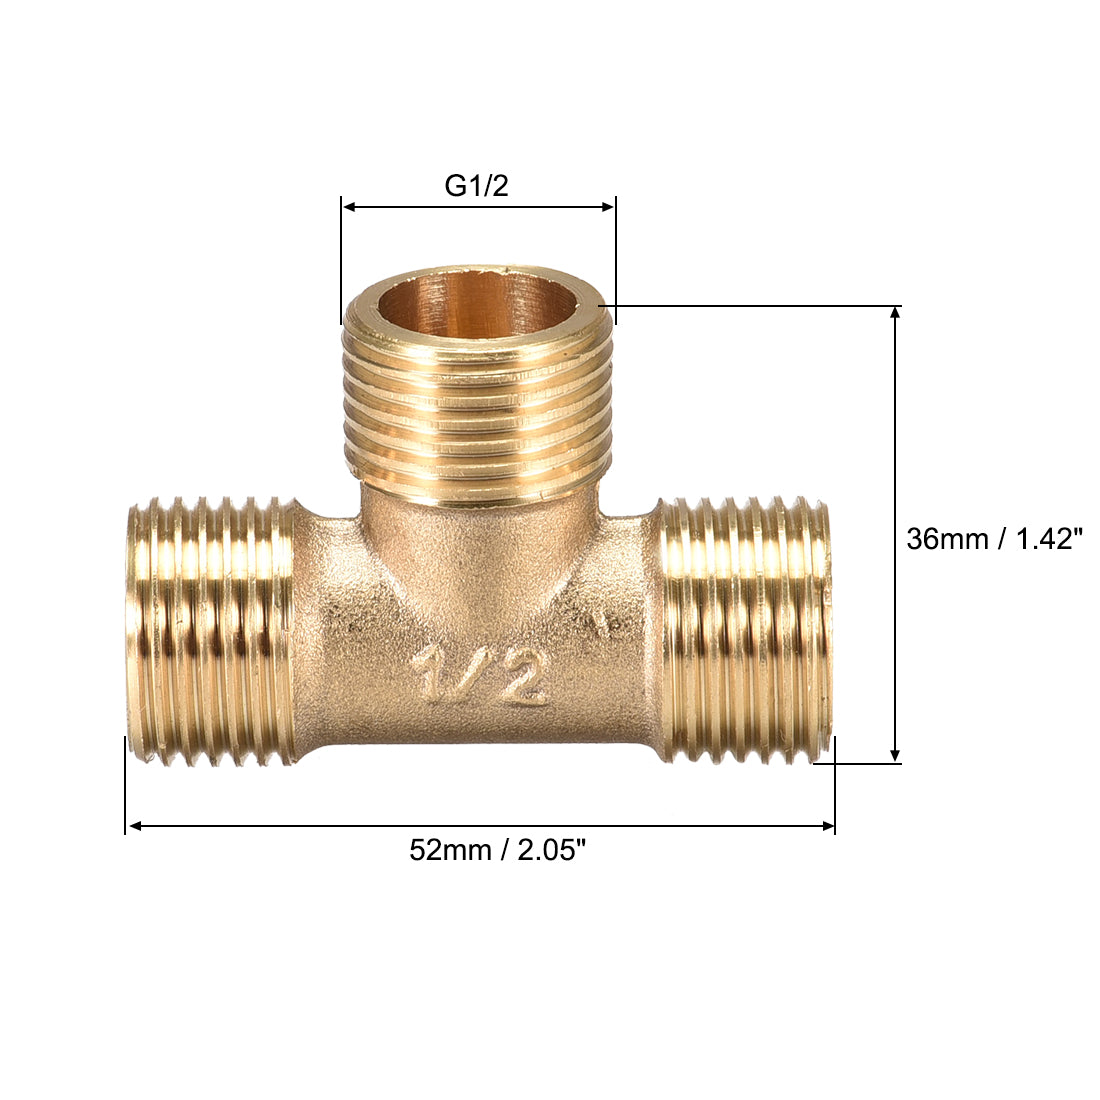 uxcell Uxcell Brass Tee Pipe Fitting G1/2 Male Thread T Shaped Connector Coupler